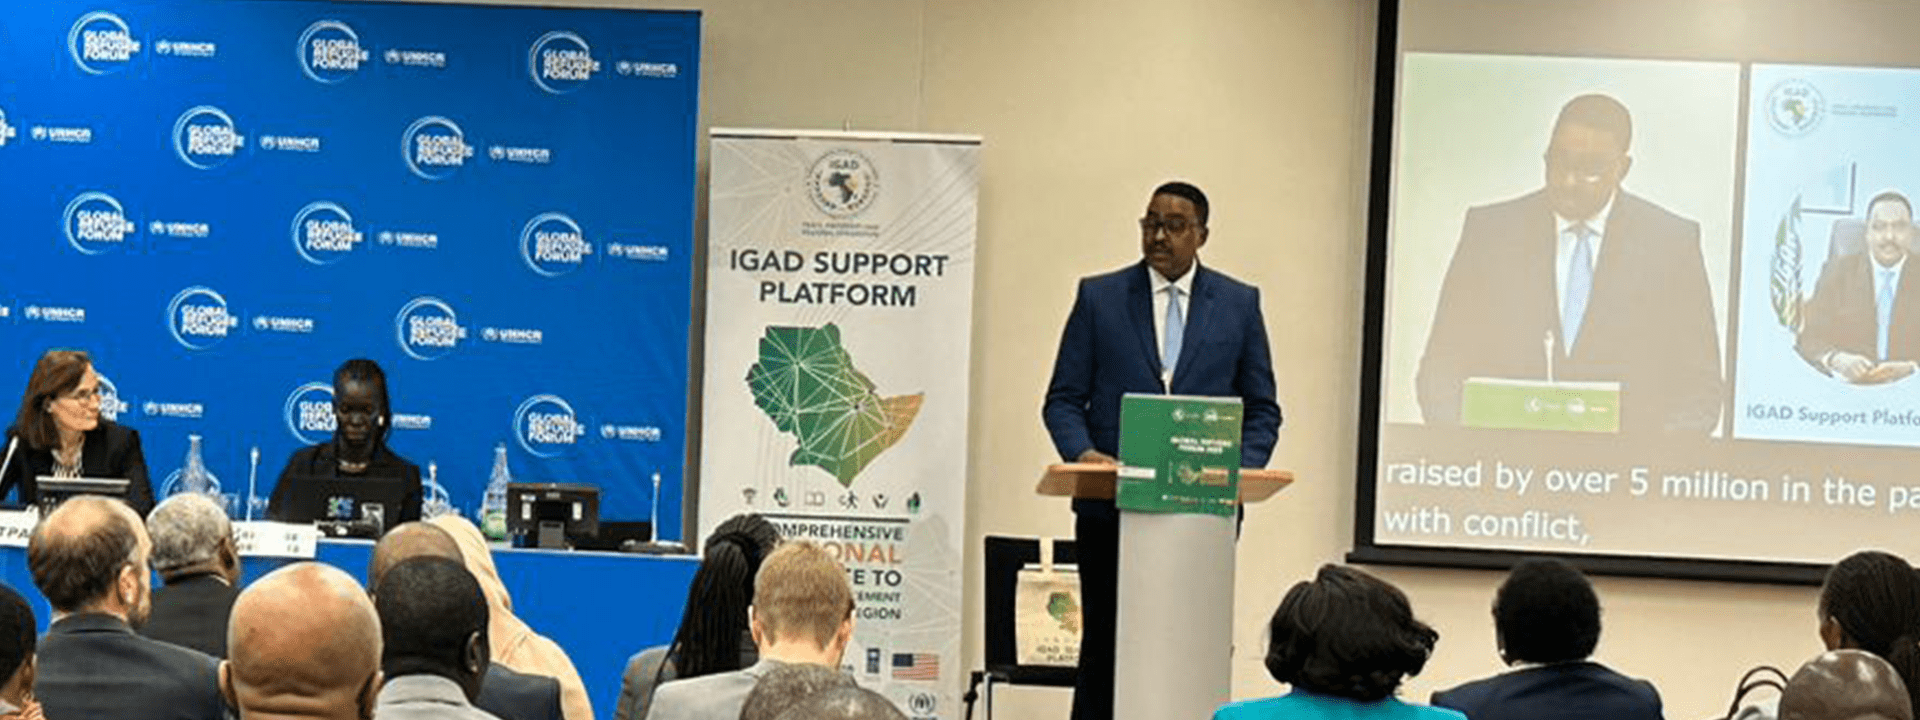 Official Remarks by Workneh Gebeyehu (PhD), IGAD Executive Secretary on the High-Level Event of The IGAD Support Platform and its Solutions Initiative for the Refugee Situation in Sudan and South Sudan